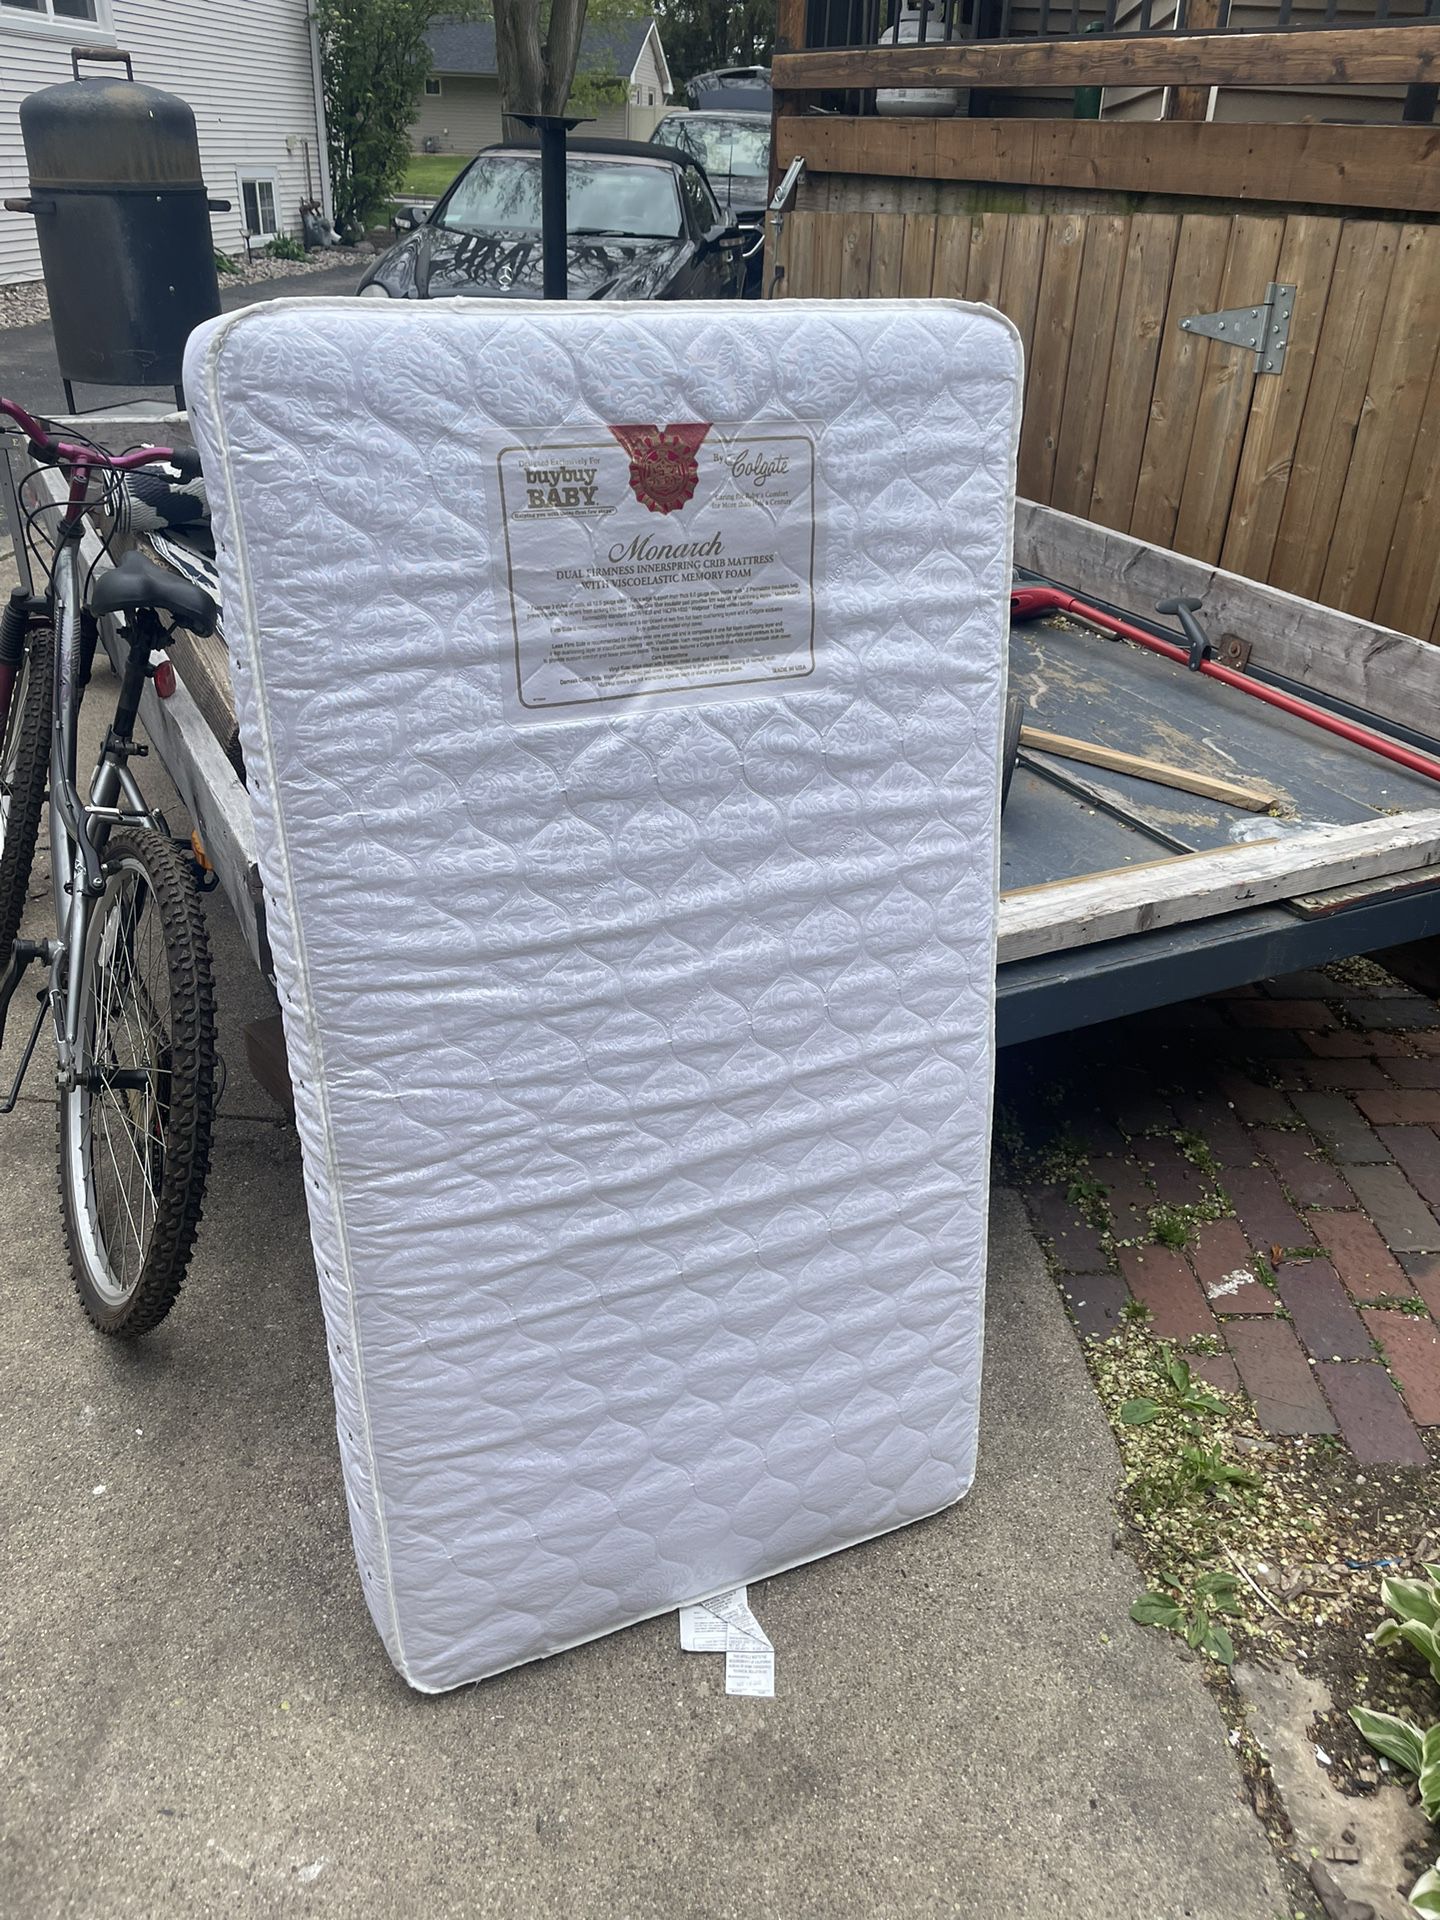 Buy Buy Baby Crib Mattress, like new, great shape, very clean 52 by 29 inch, $10